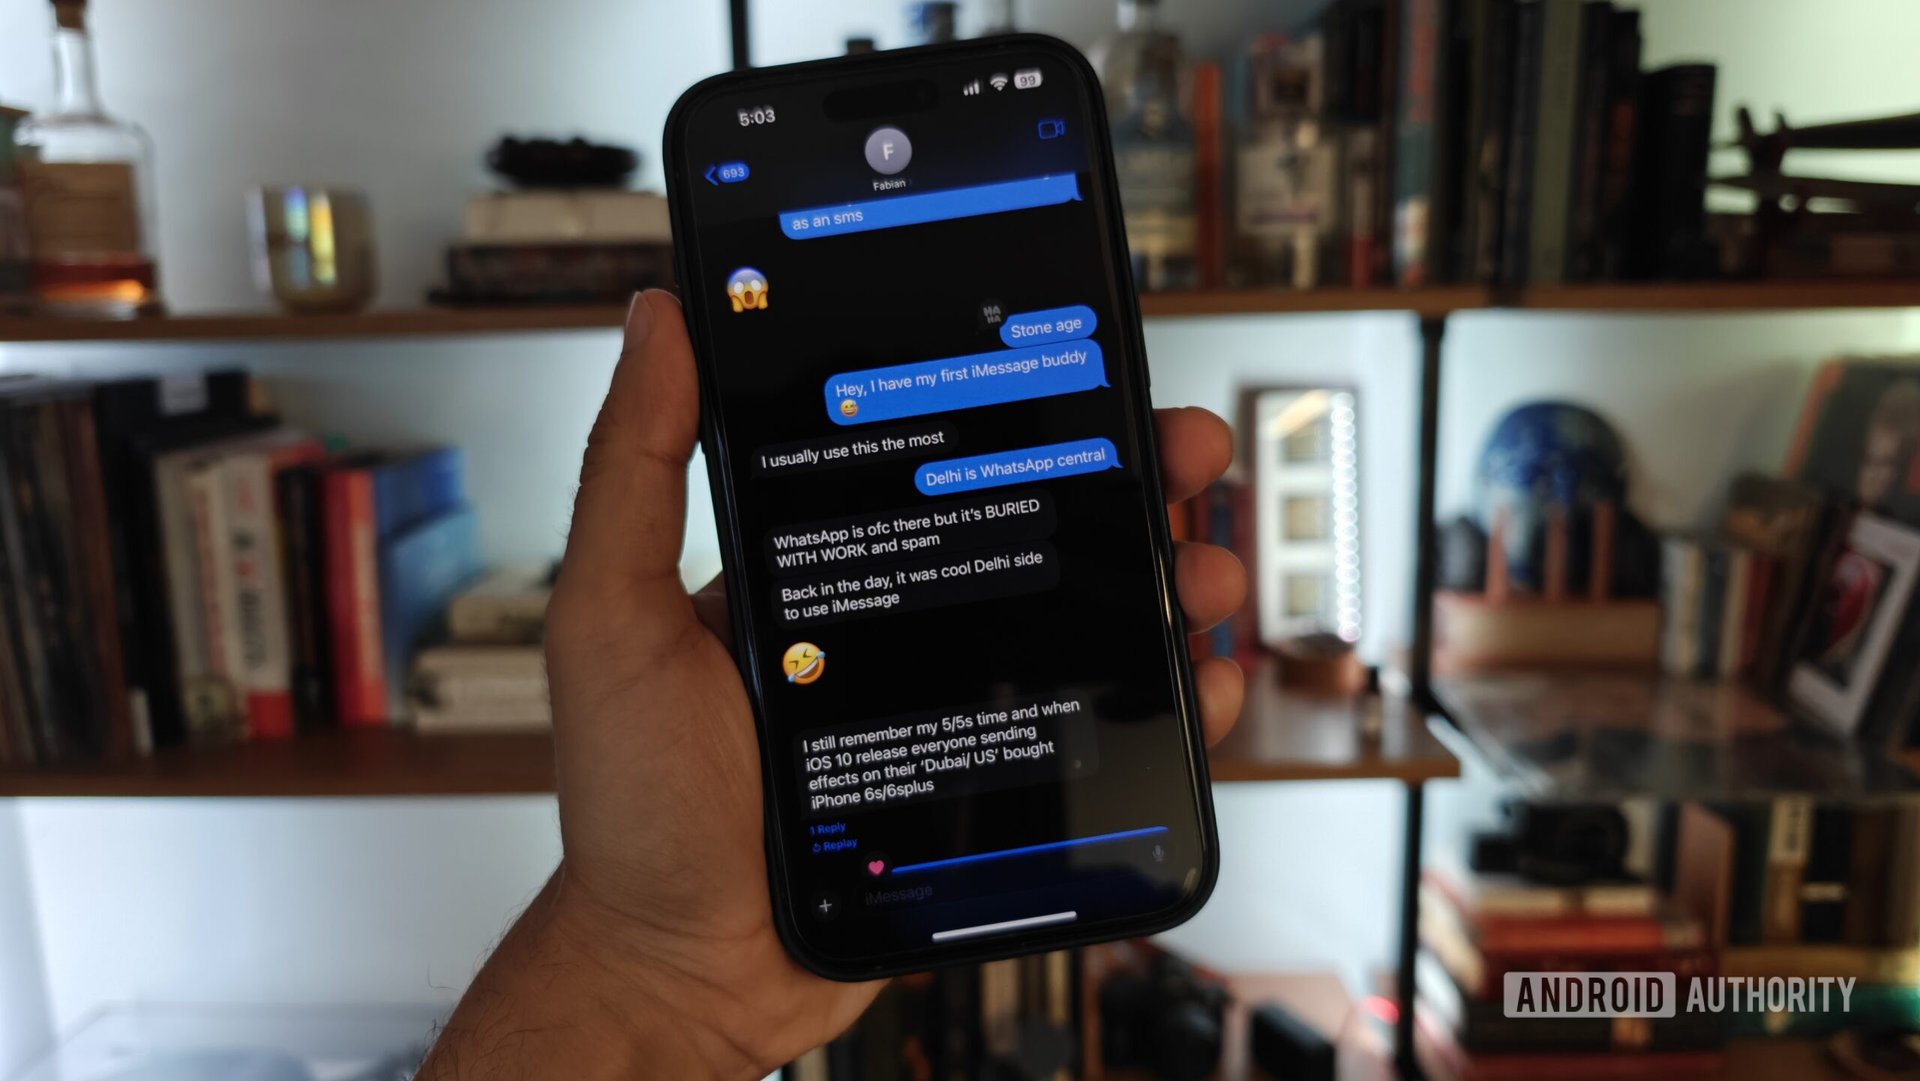 iMessage on an Android phone